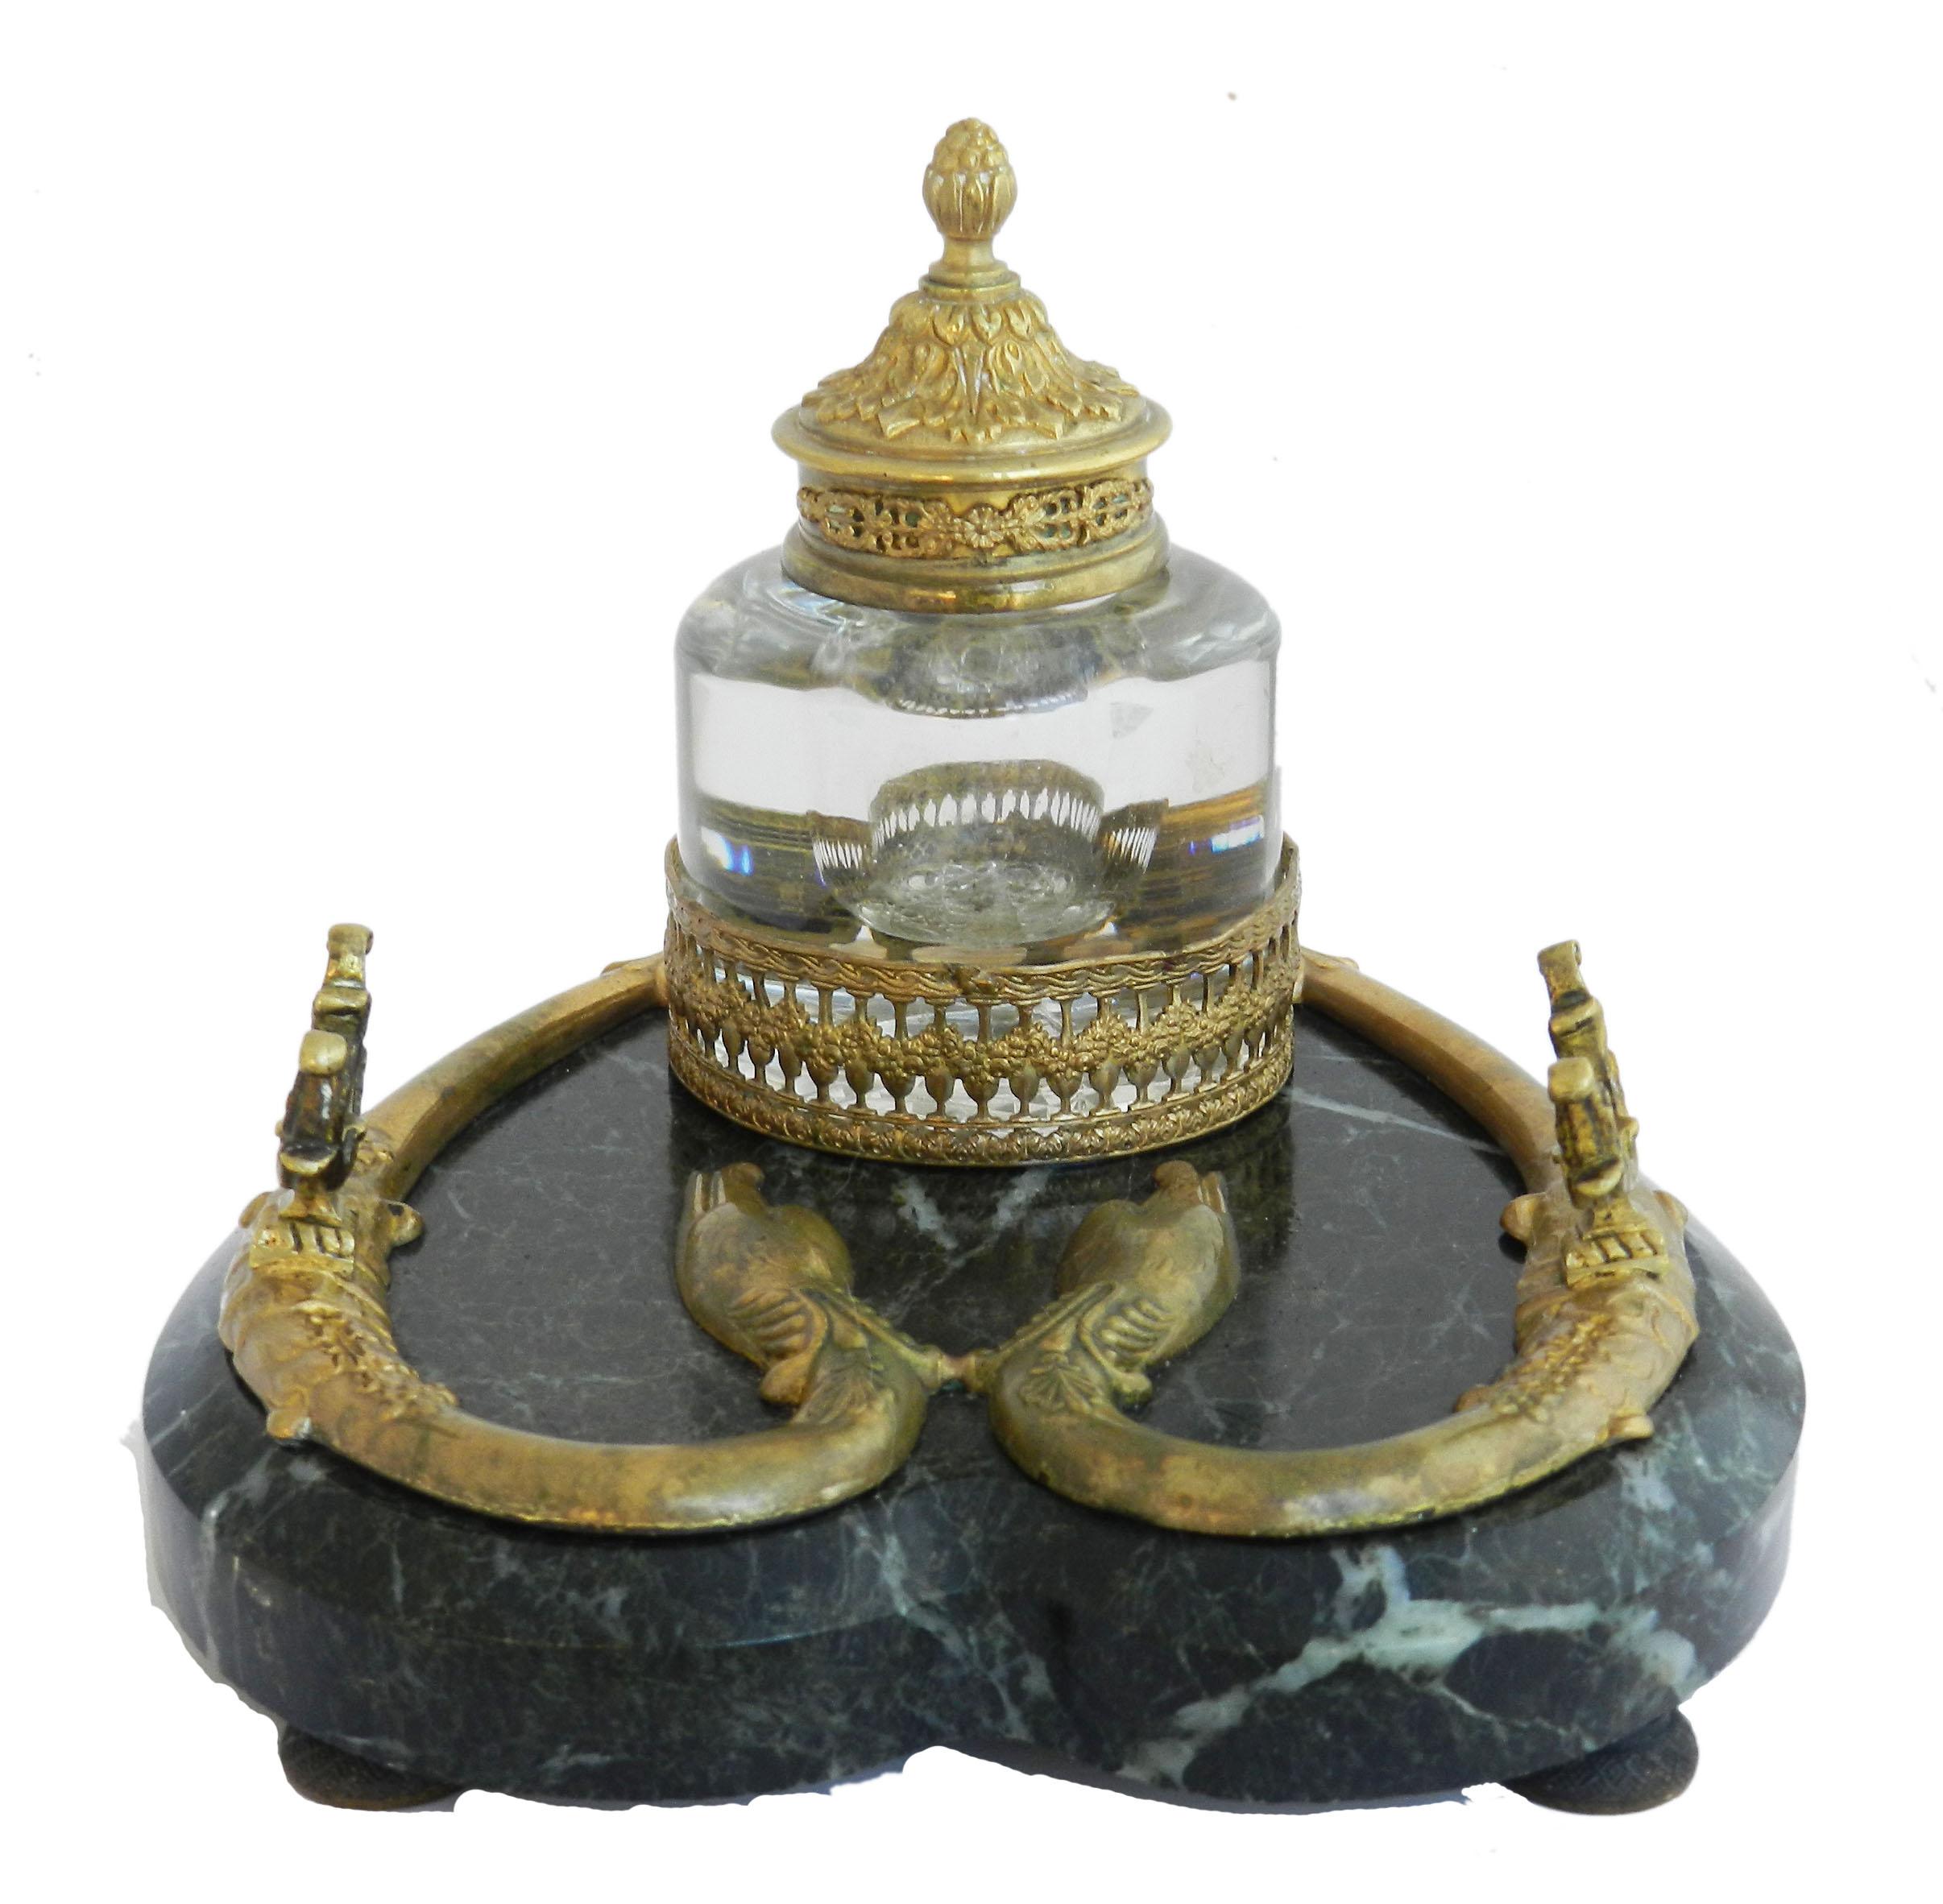 Antique bronze marble inkwell desk crystal inkstand French c1880
Unusual serpent base
Bronze on variegated marble base
Holds pen across the top 
With crystal inkwell
Free Shipping to USA, EU, UK please do check with us for other countries 
Good